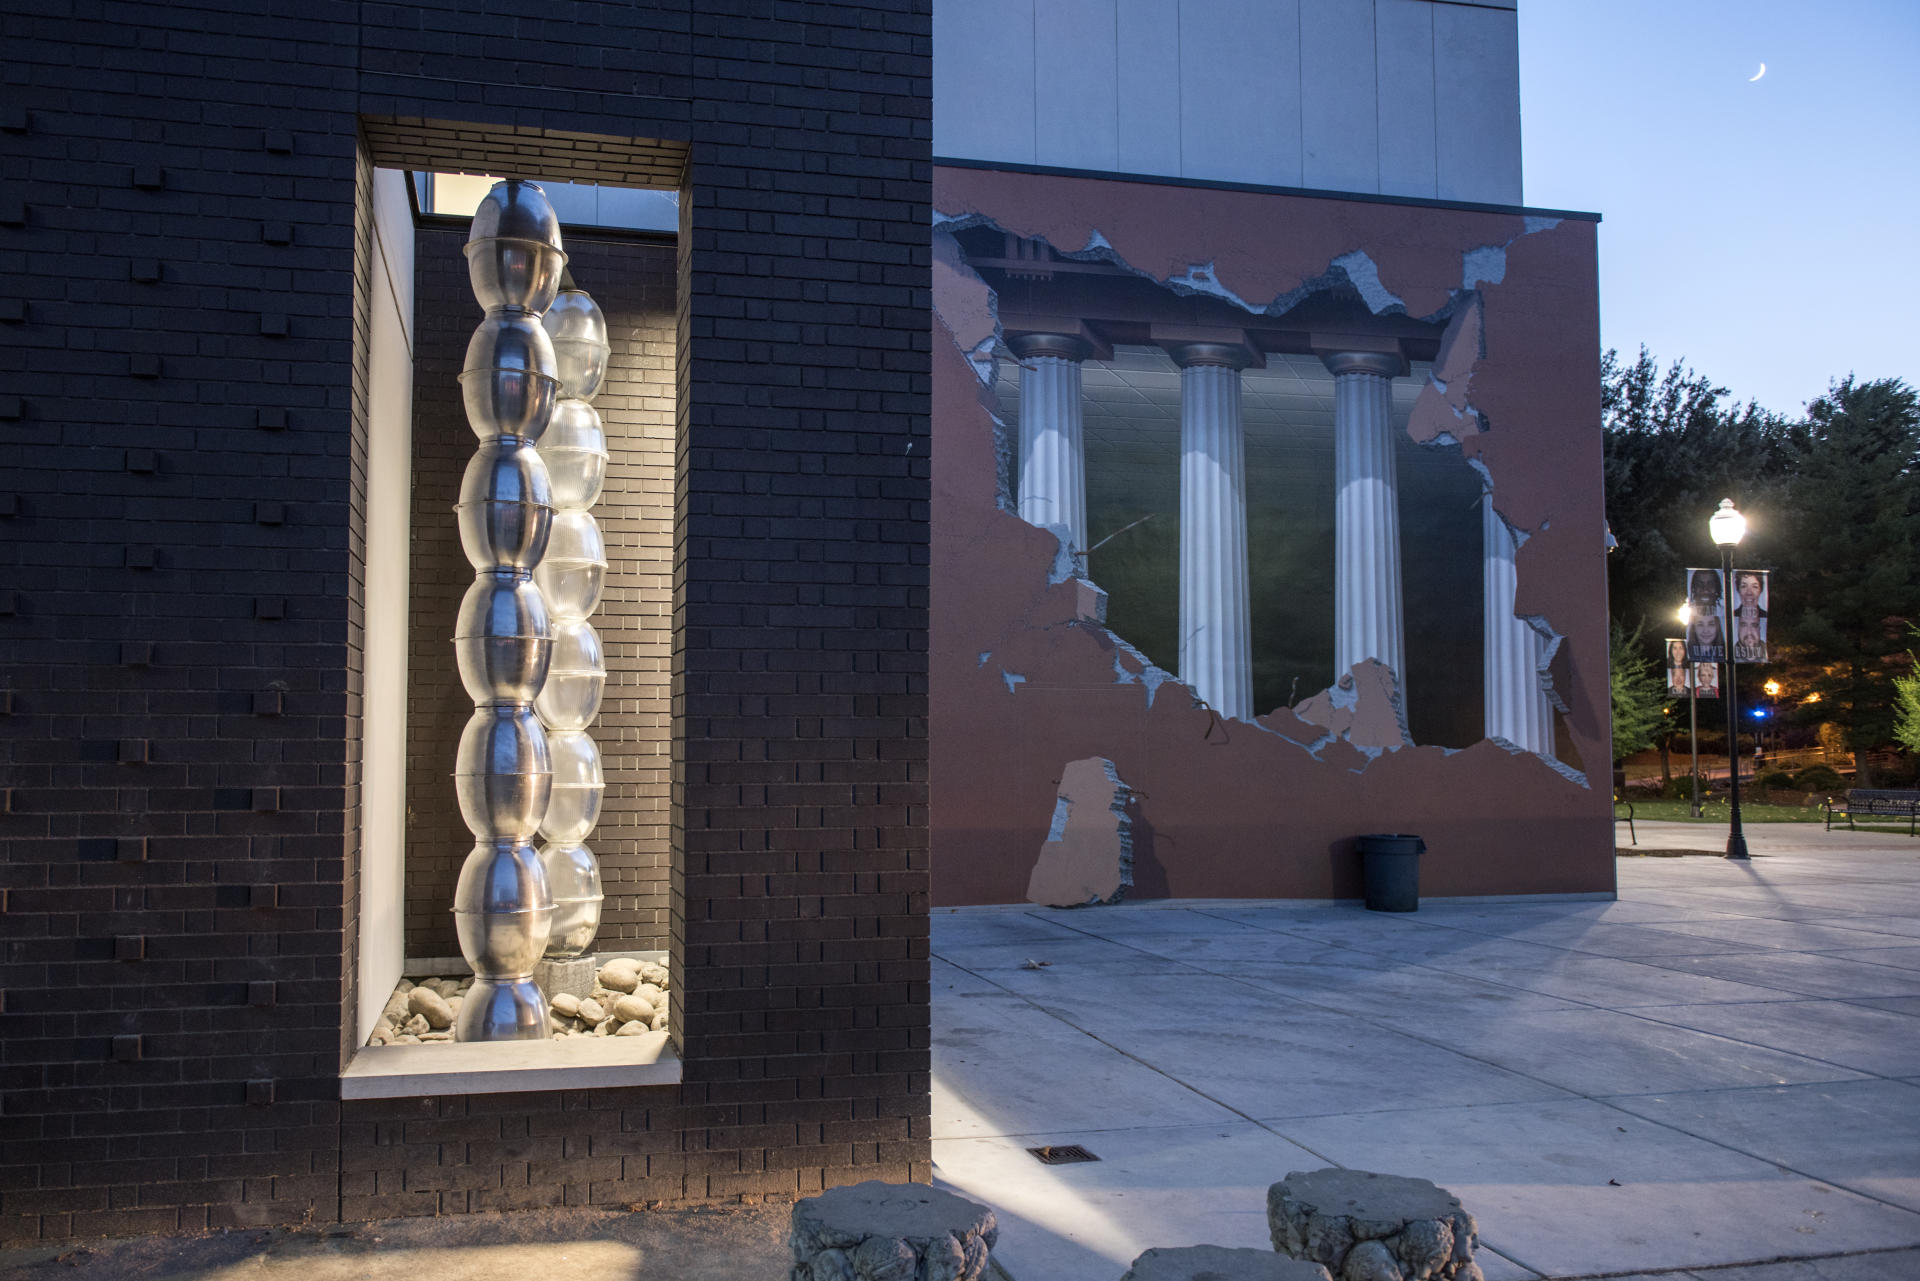 One of the building's public art spaces currently exhibits 'Brancusi Endless Column.'